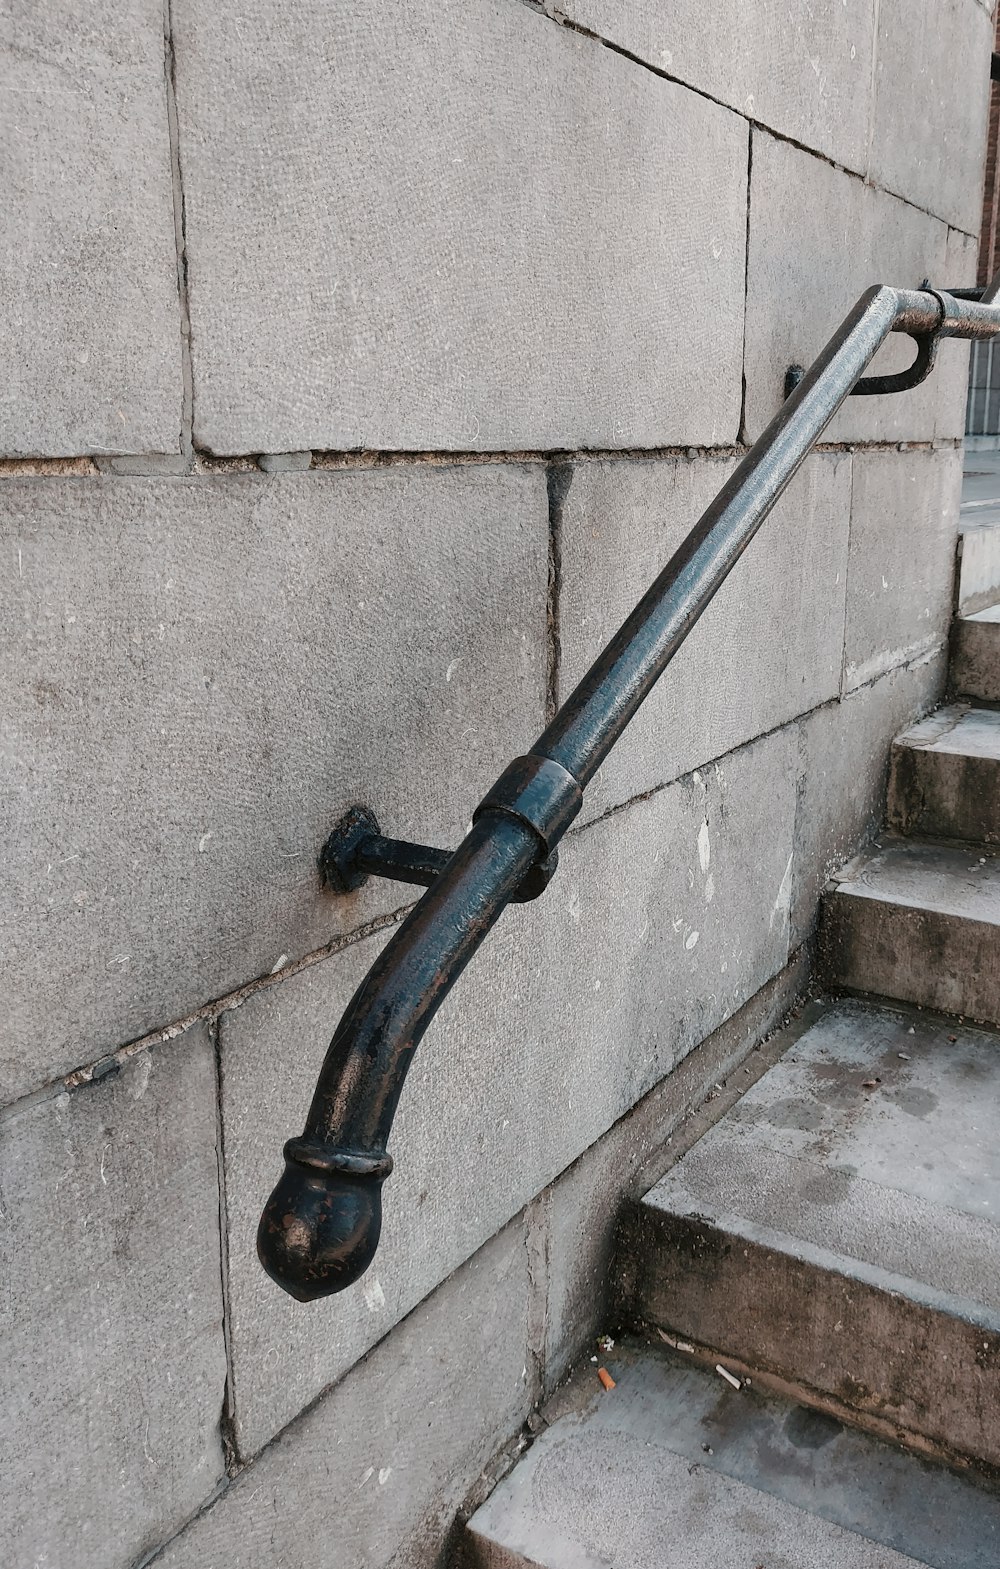 a metal handrail on the side of a building